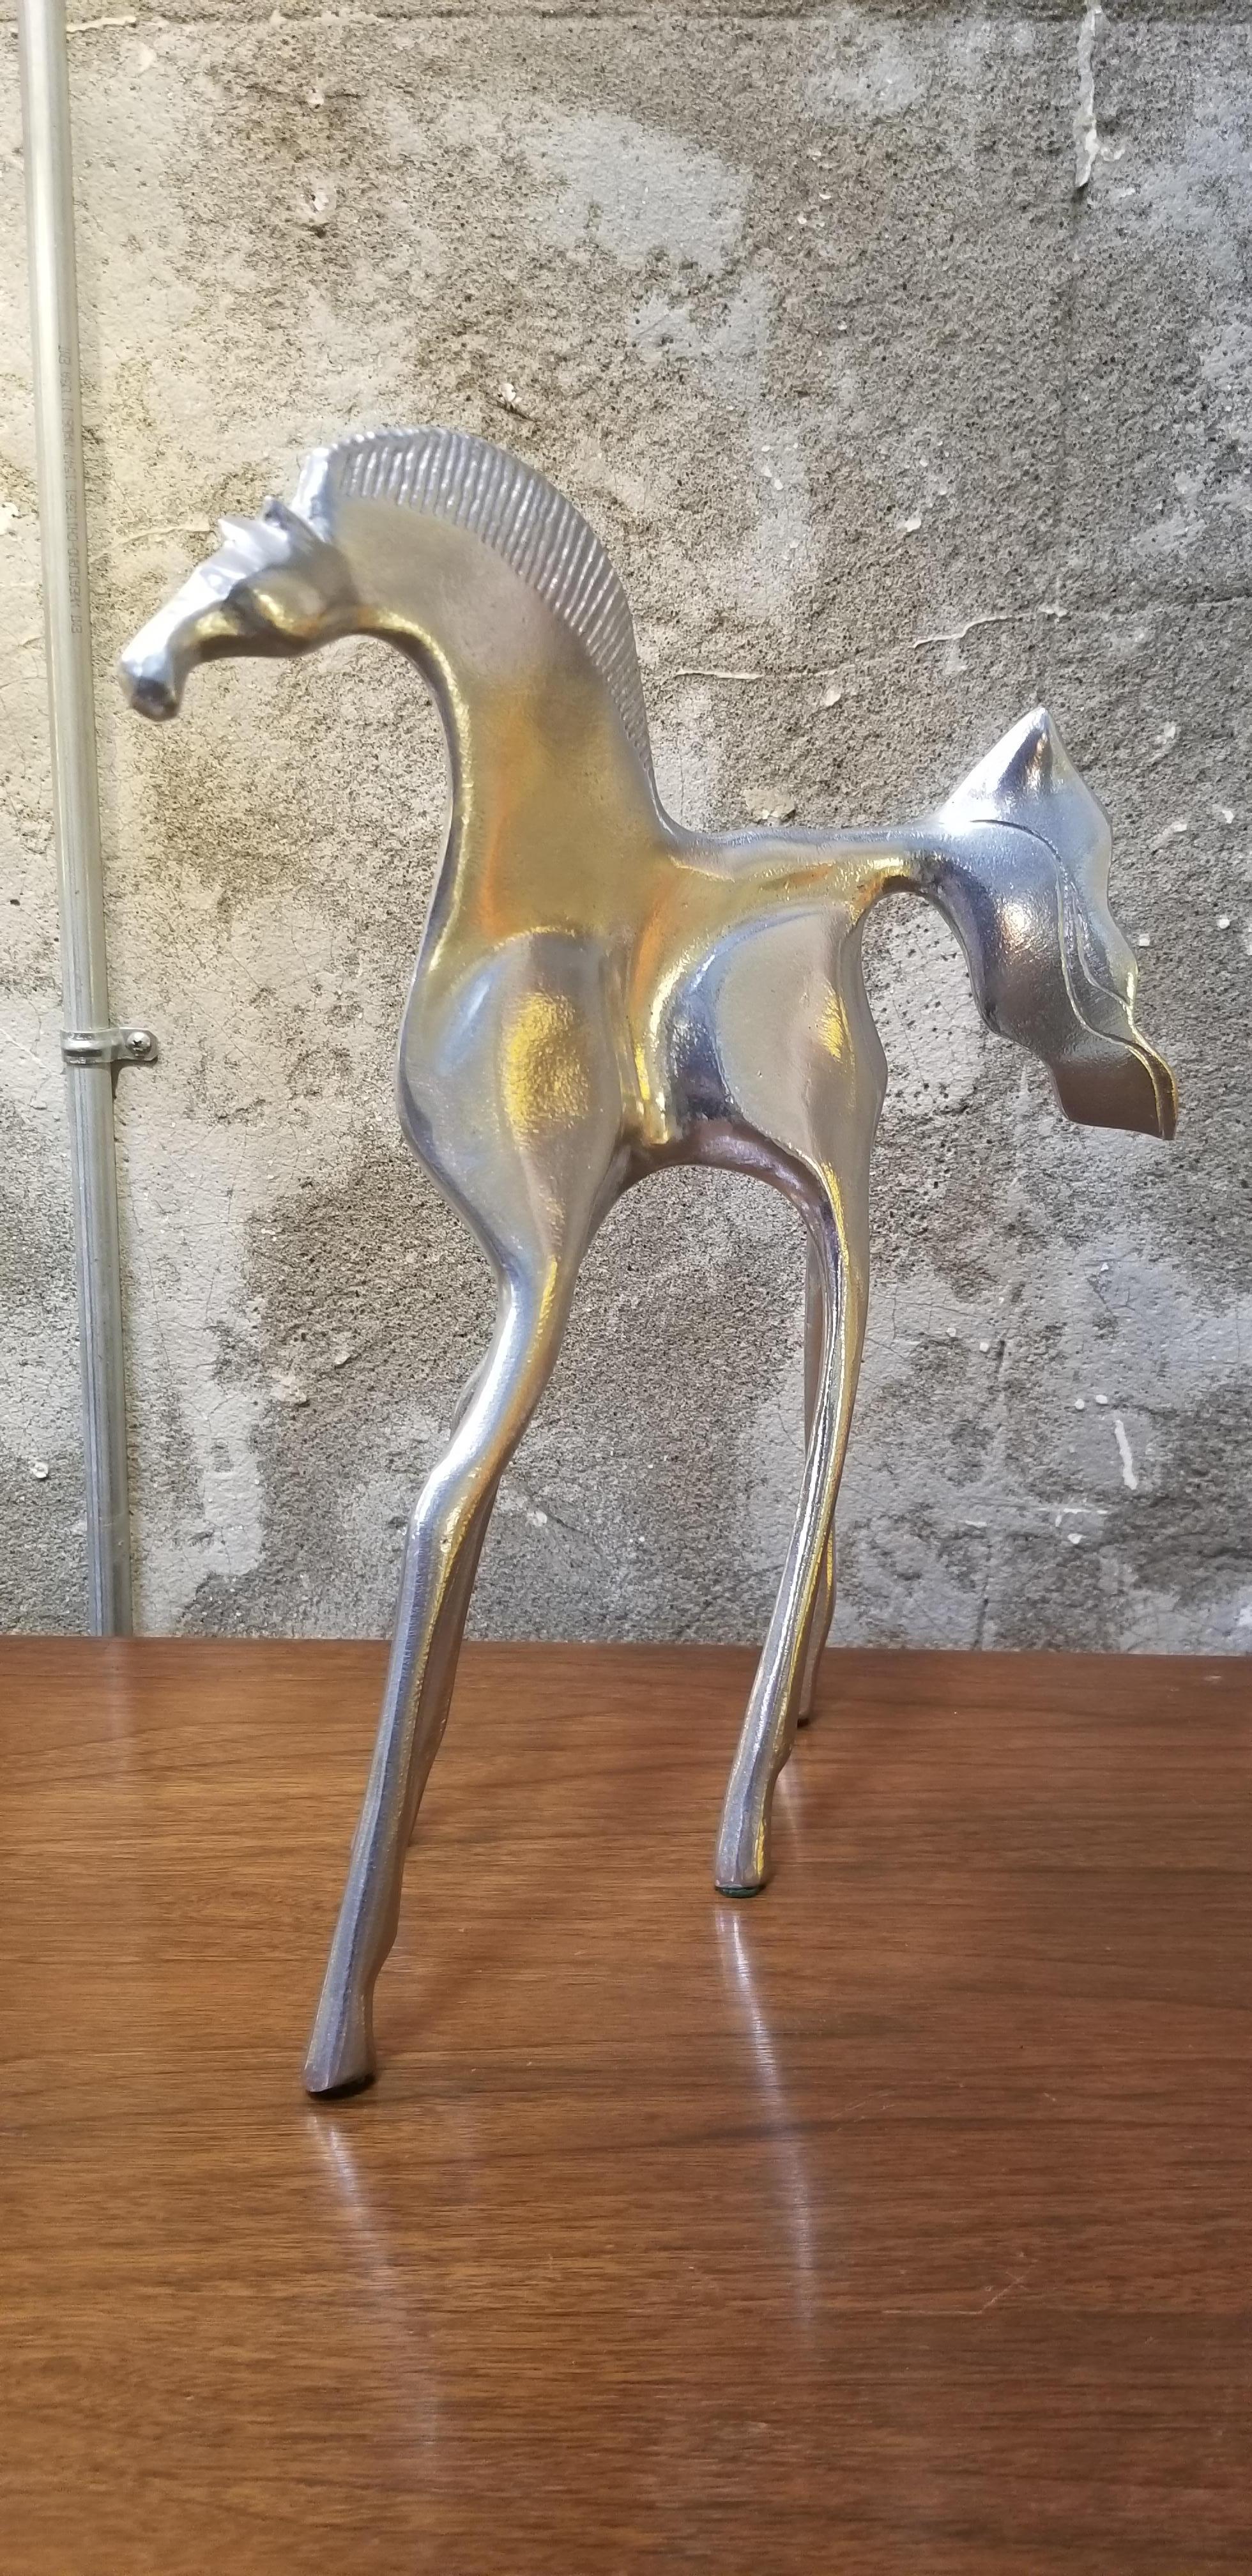 Stylized figure of a horse by Donald Drumm. Circa. 1970's. Signed.

Don Drumm (born April 11, 1935) is an American sculptor, designer and master craftsman based in Akron, Ohio. He was born in Warren, Ohio and received degrees in art from Kent